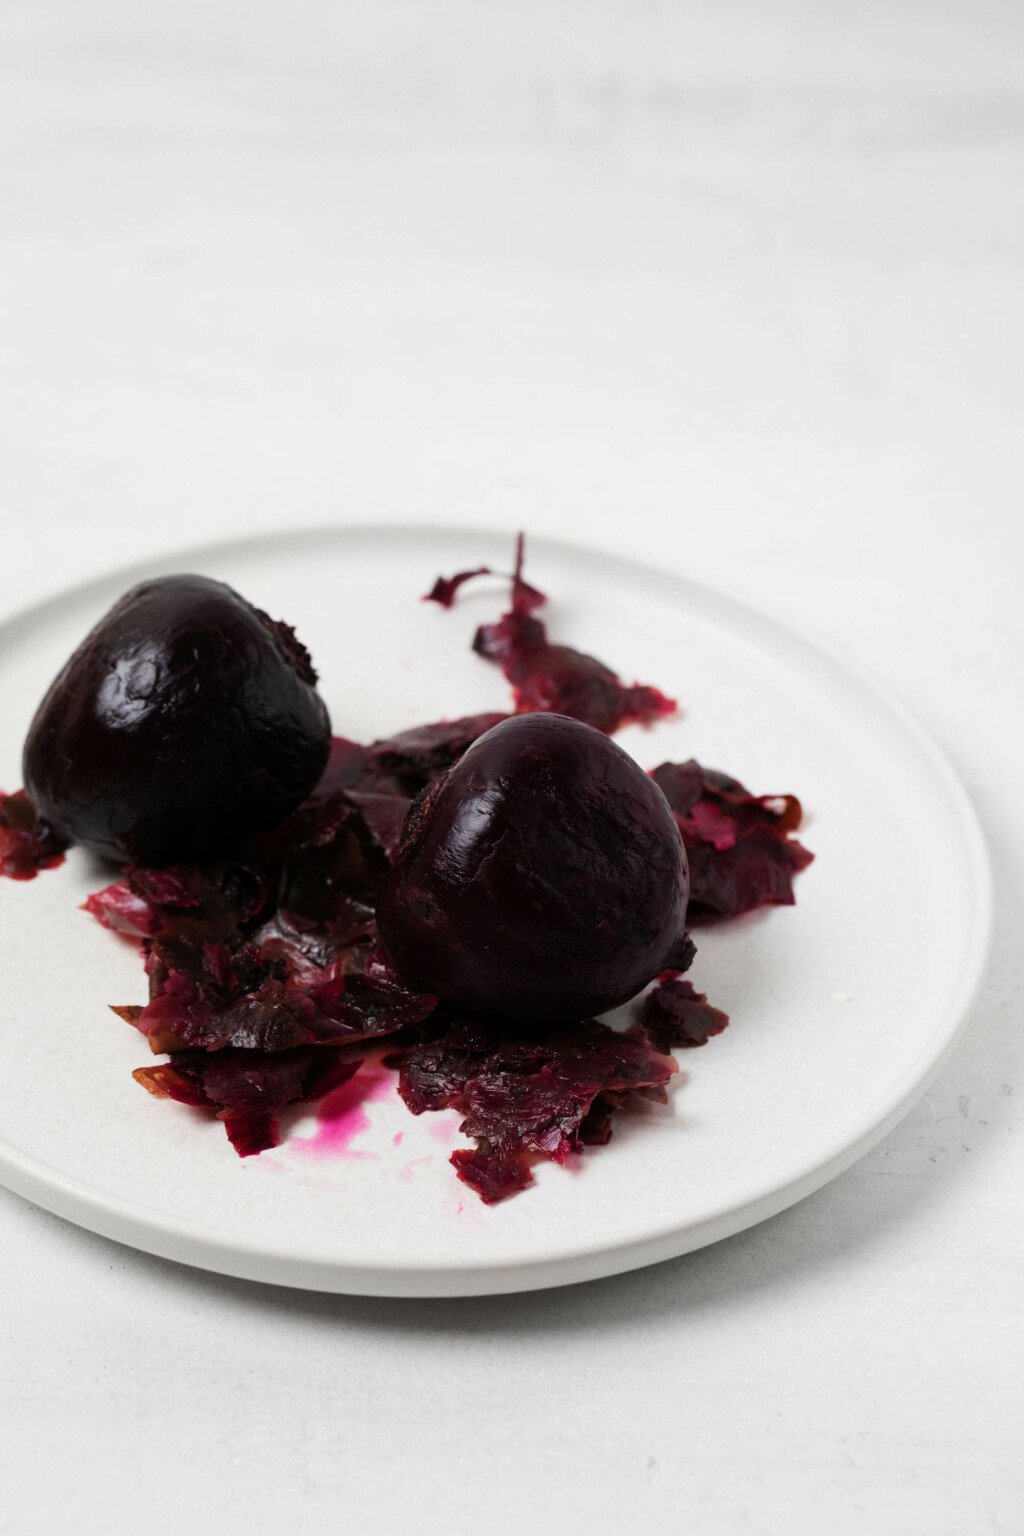 Roasted beets have just had their skins peeled off. The peeled beets rest on a white plate.